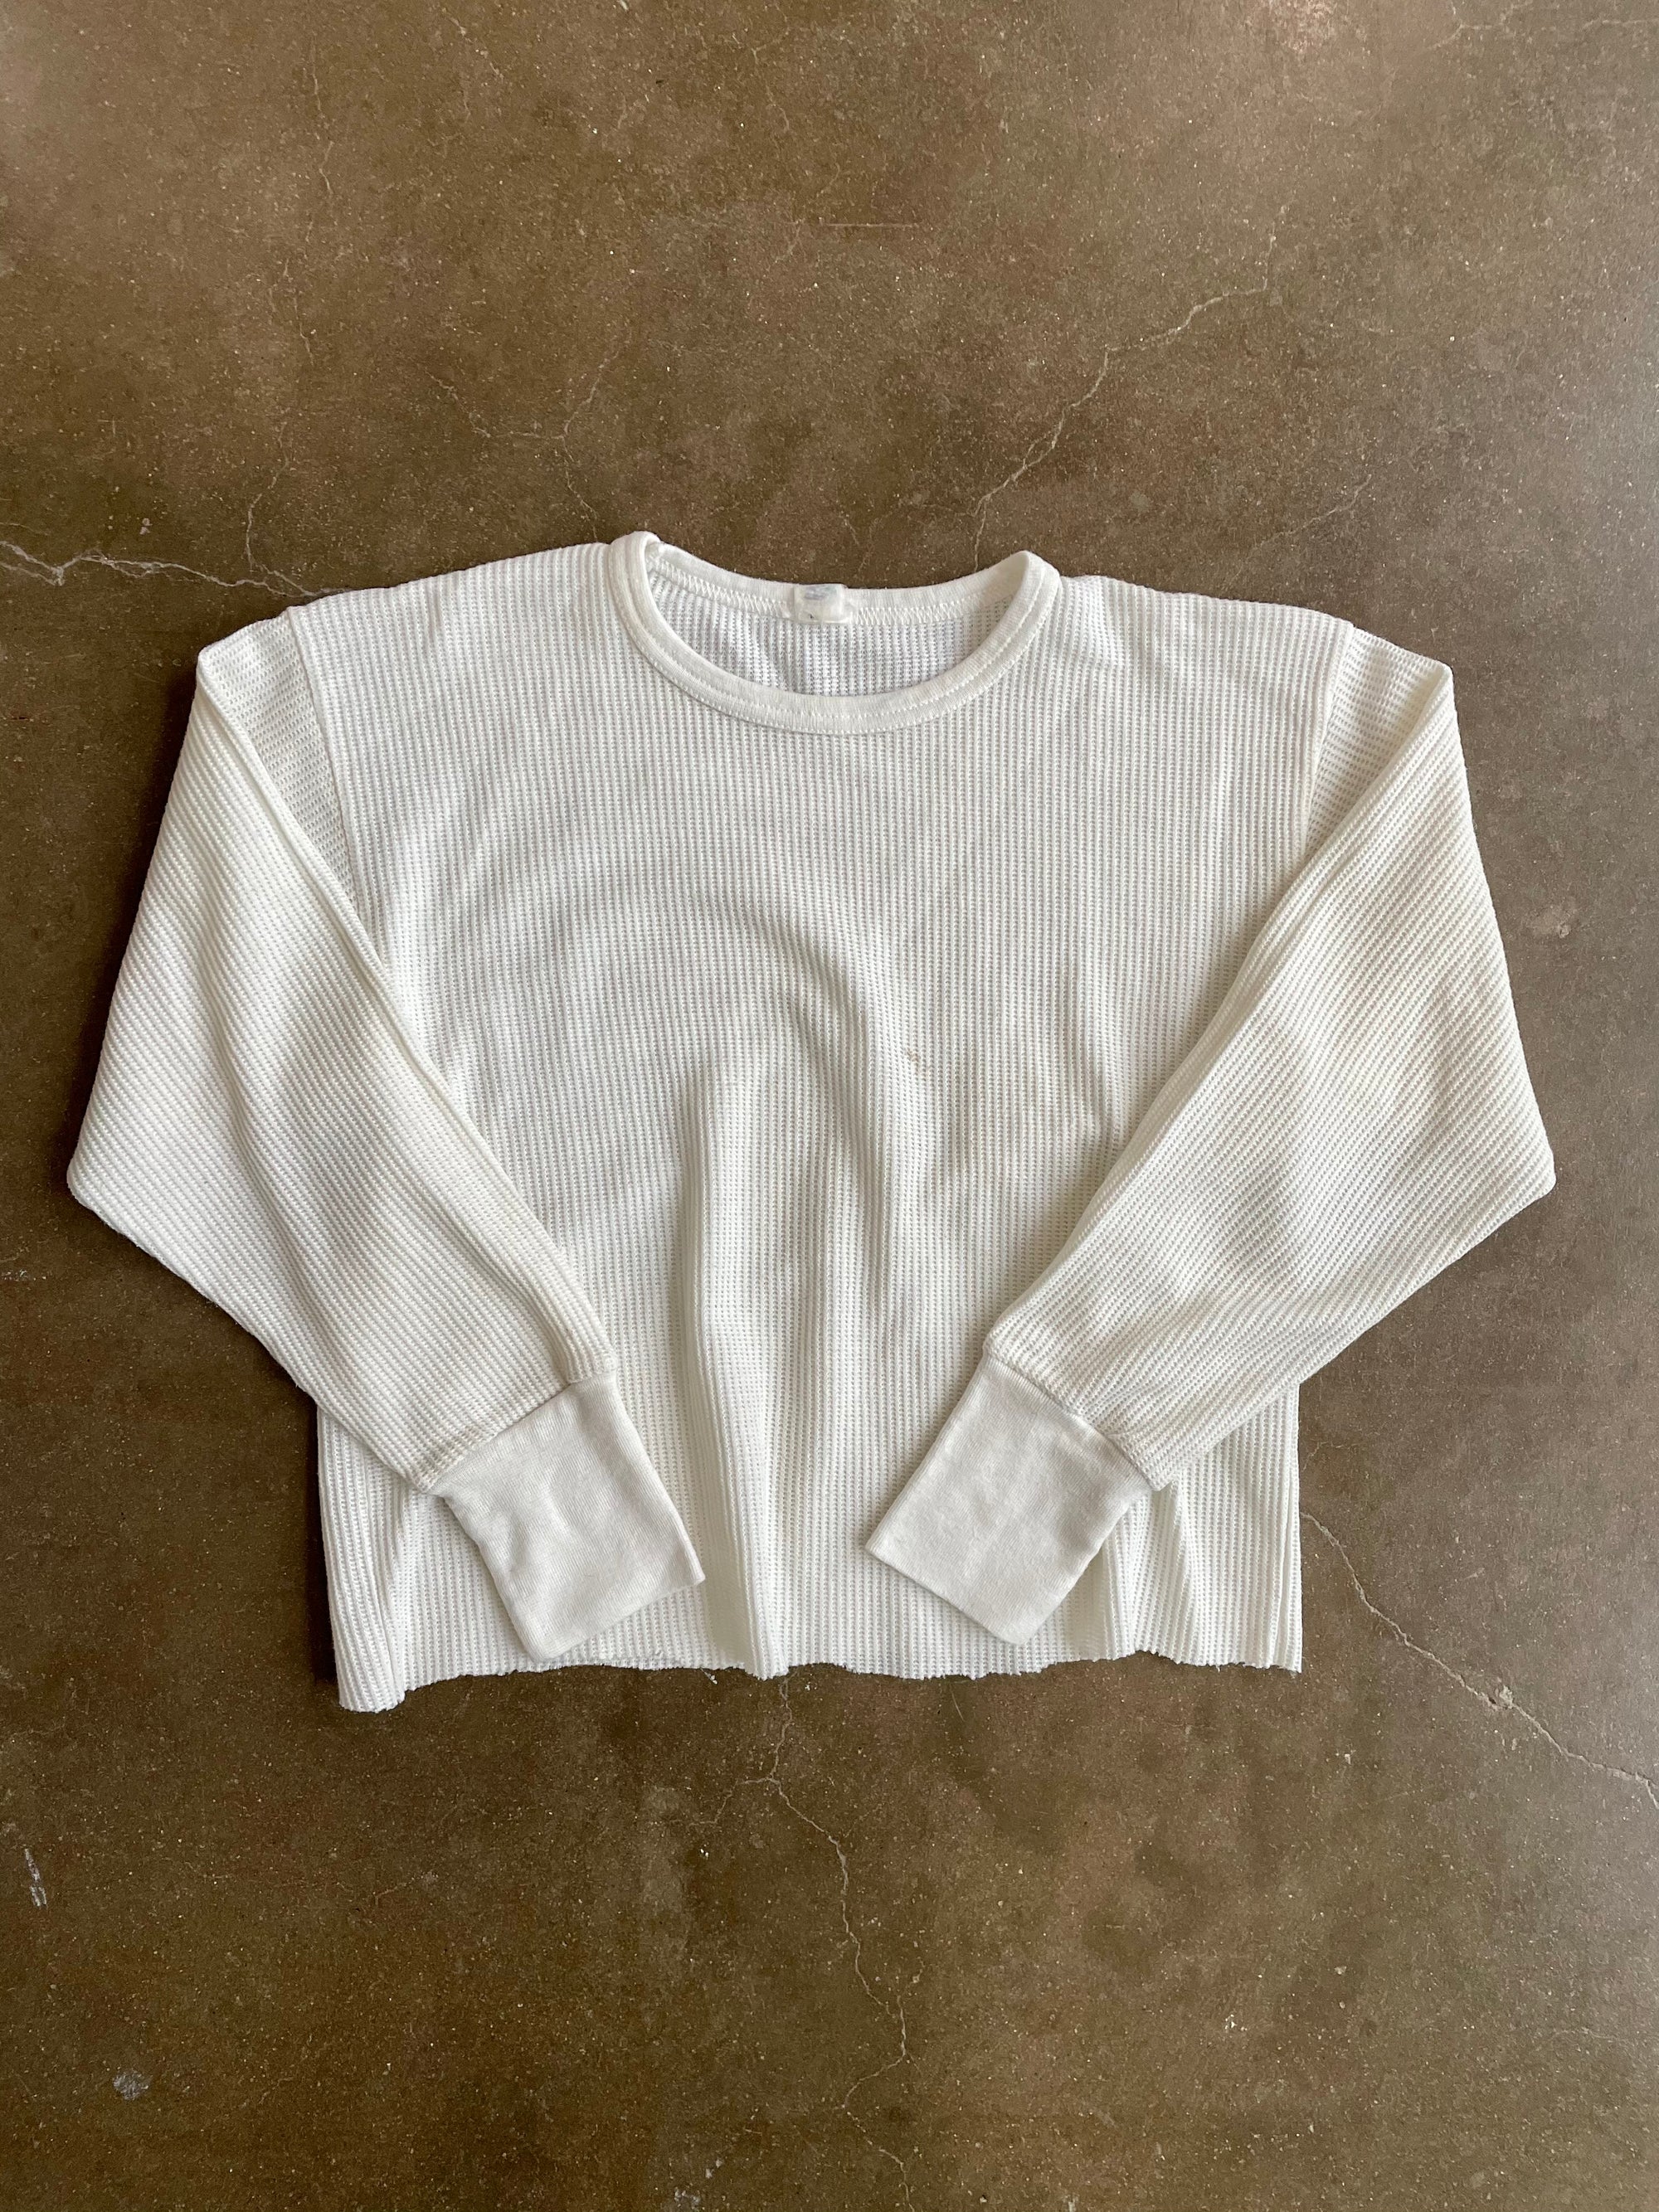 Vintage Cropped White Thermal